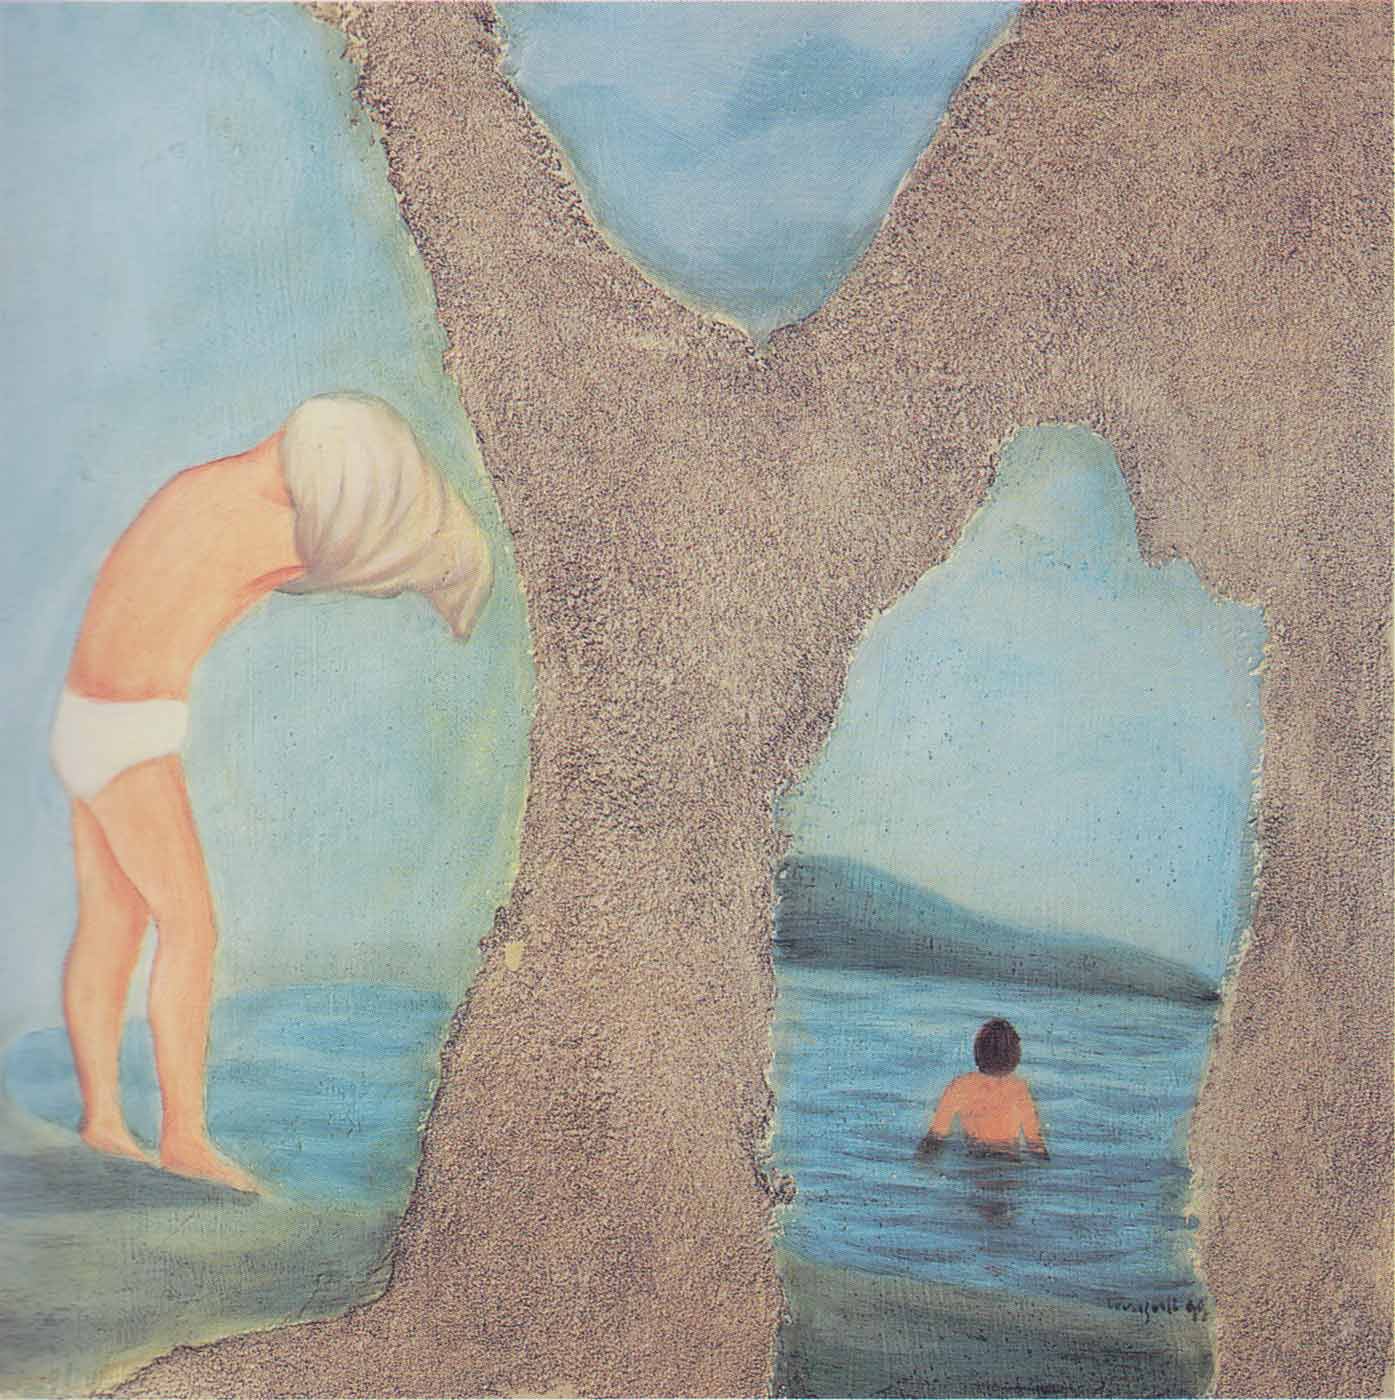 <em>To the Island</em>, 1999. Oil on mixed media, 16 x 16 in. (41 x 41 cm)